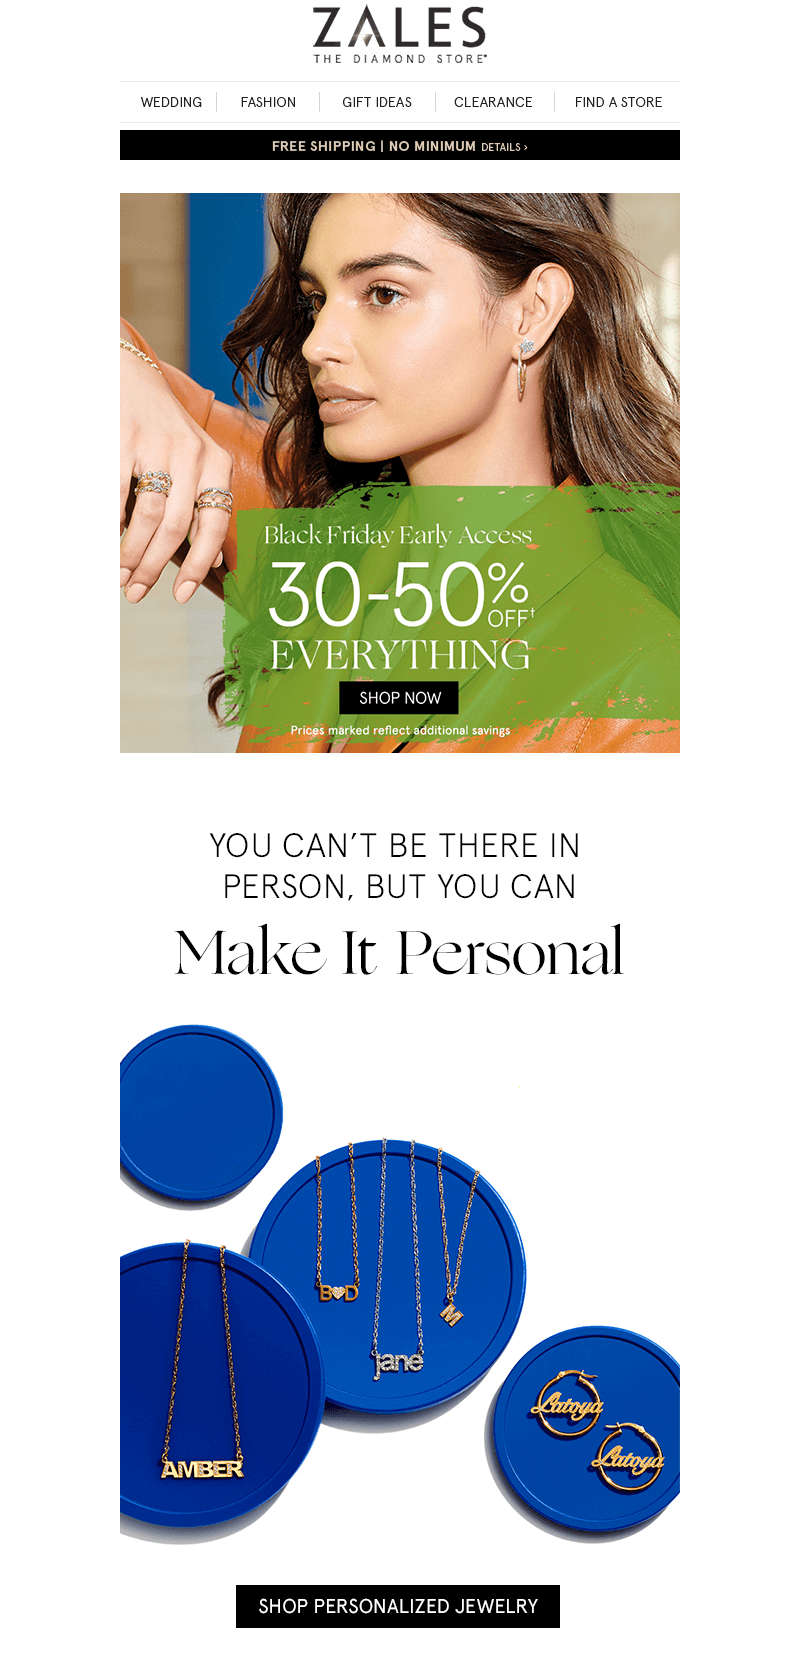 A marketing email promoting personalized jewelry